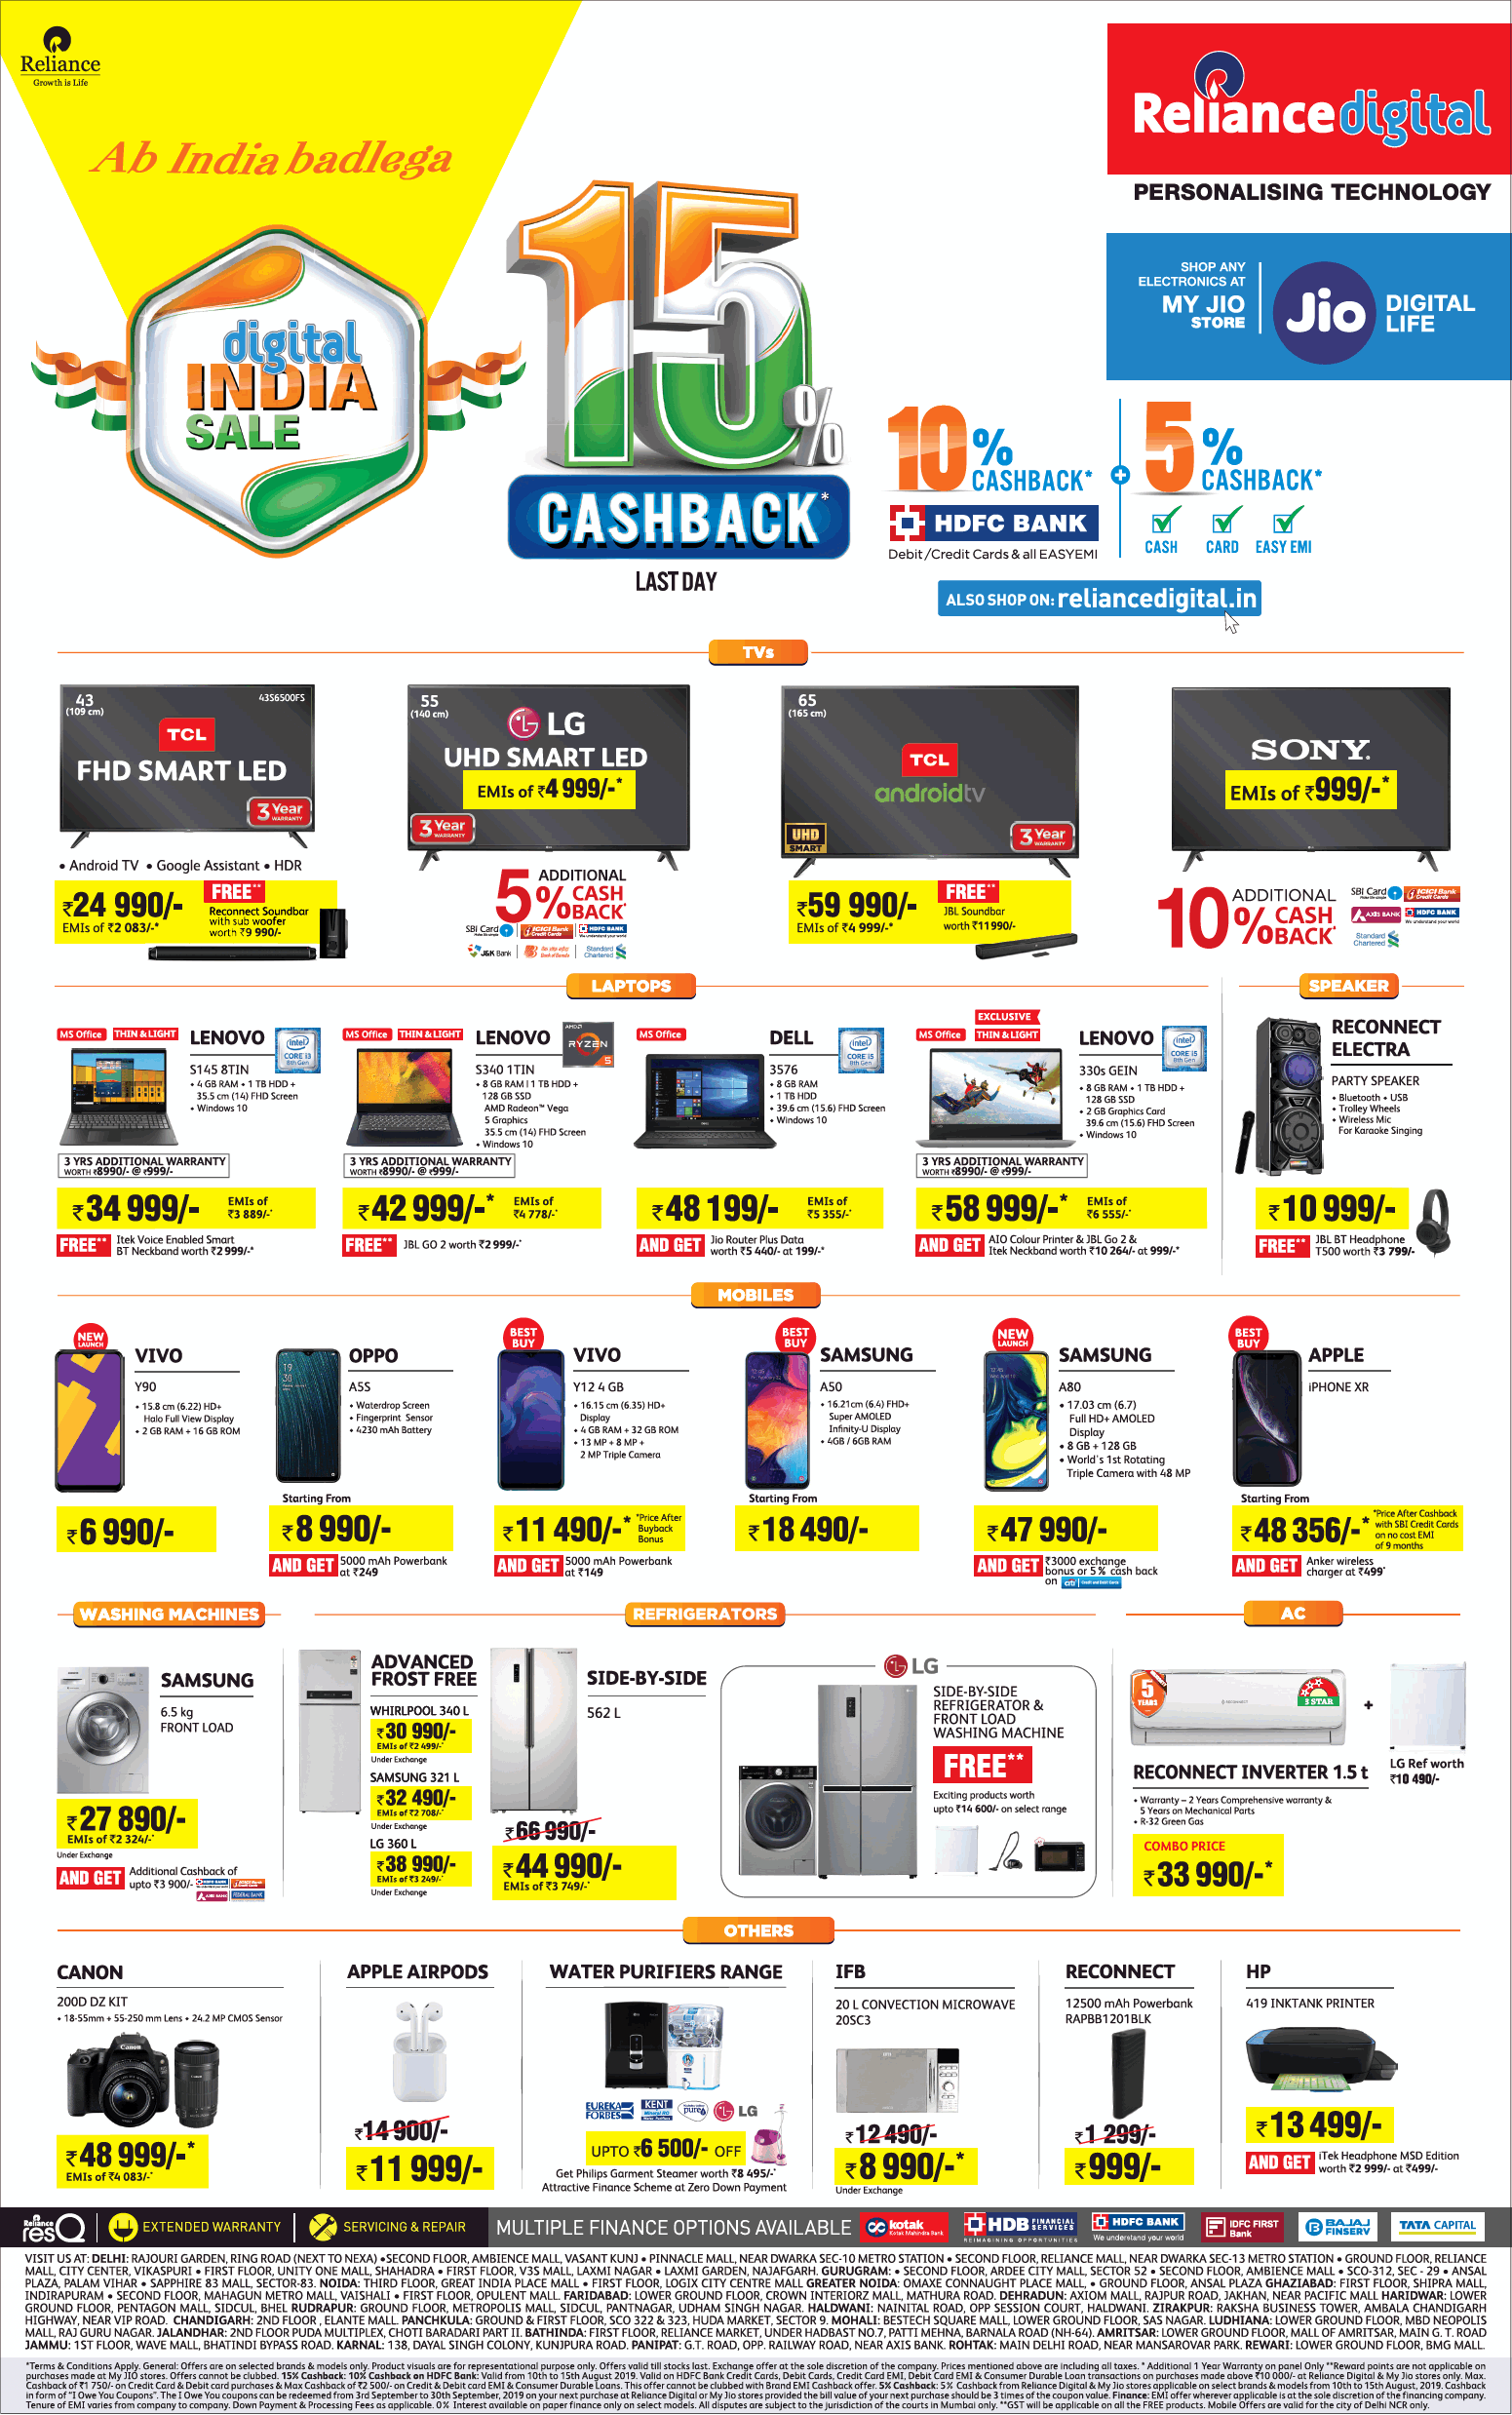 reliance-digital-ab-india-badlega-10%-cashback-on-hdfc-cards-ad-times-of-india-delhi-15-08-2019.png